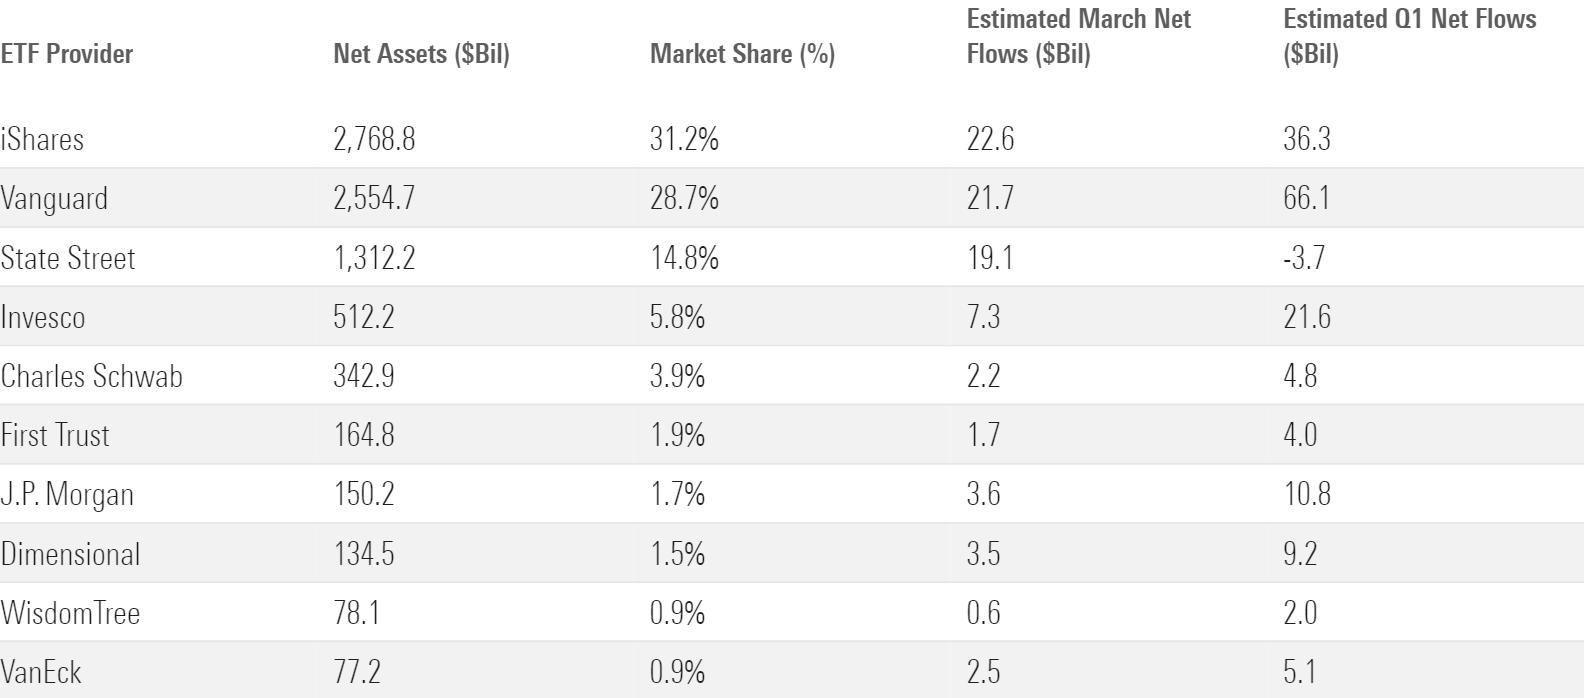 Table of the total assets, market share, and net flows for the 10 largest ETF providers.